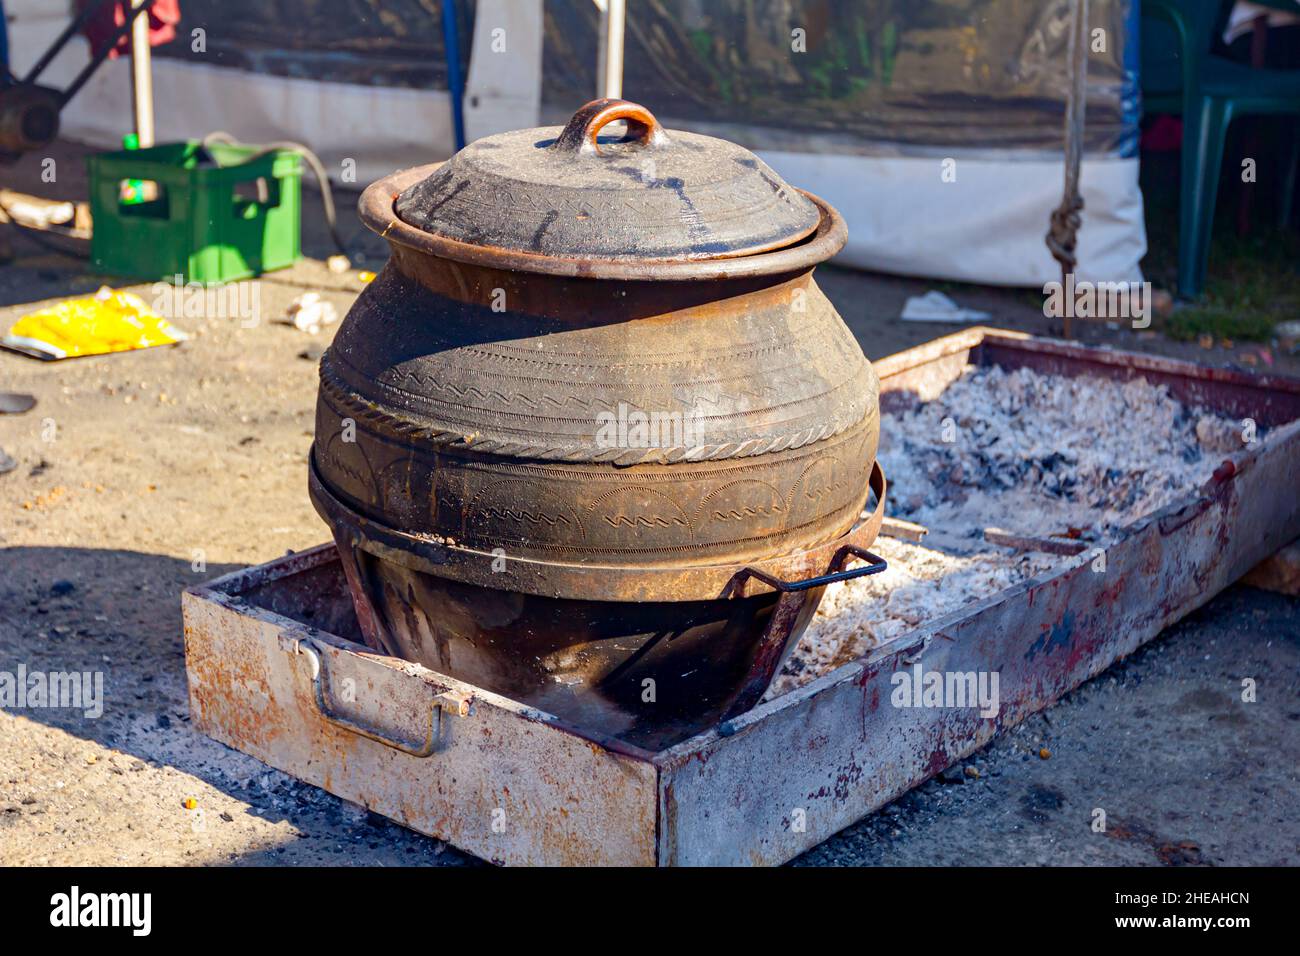 https://c8.alamy.com/comp/2HEAHCN/big-amount-of-food-is-cooking-in-a-large-ceramic-clay-pots-on-embers-2HEAHCN.jpg